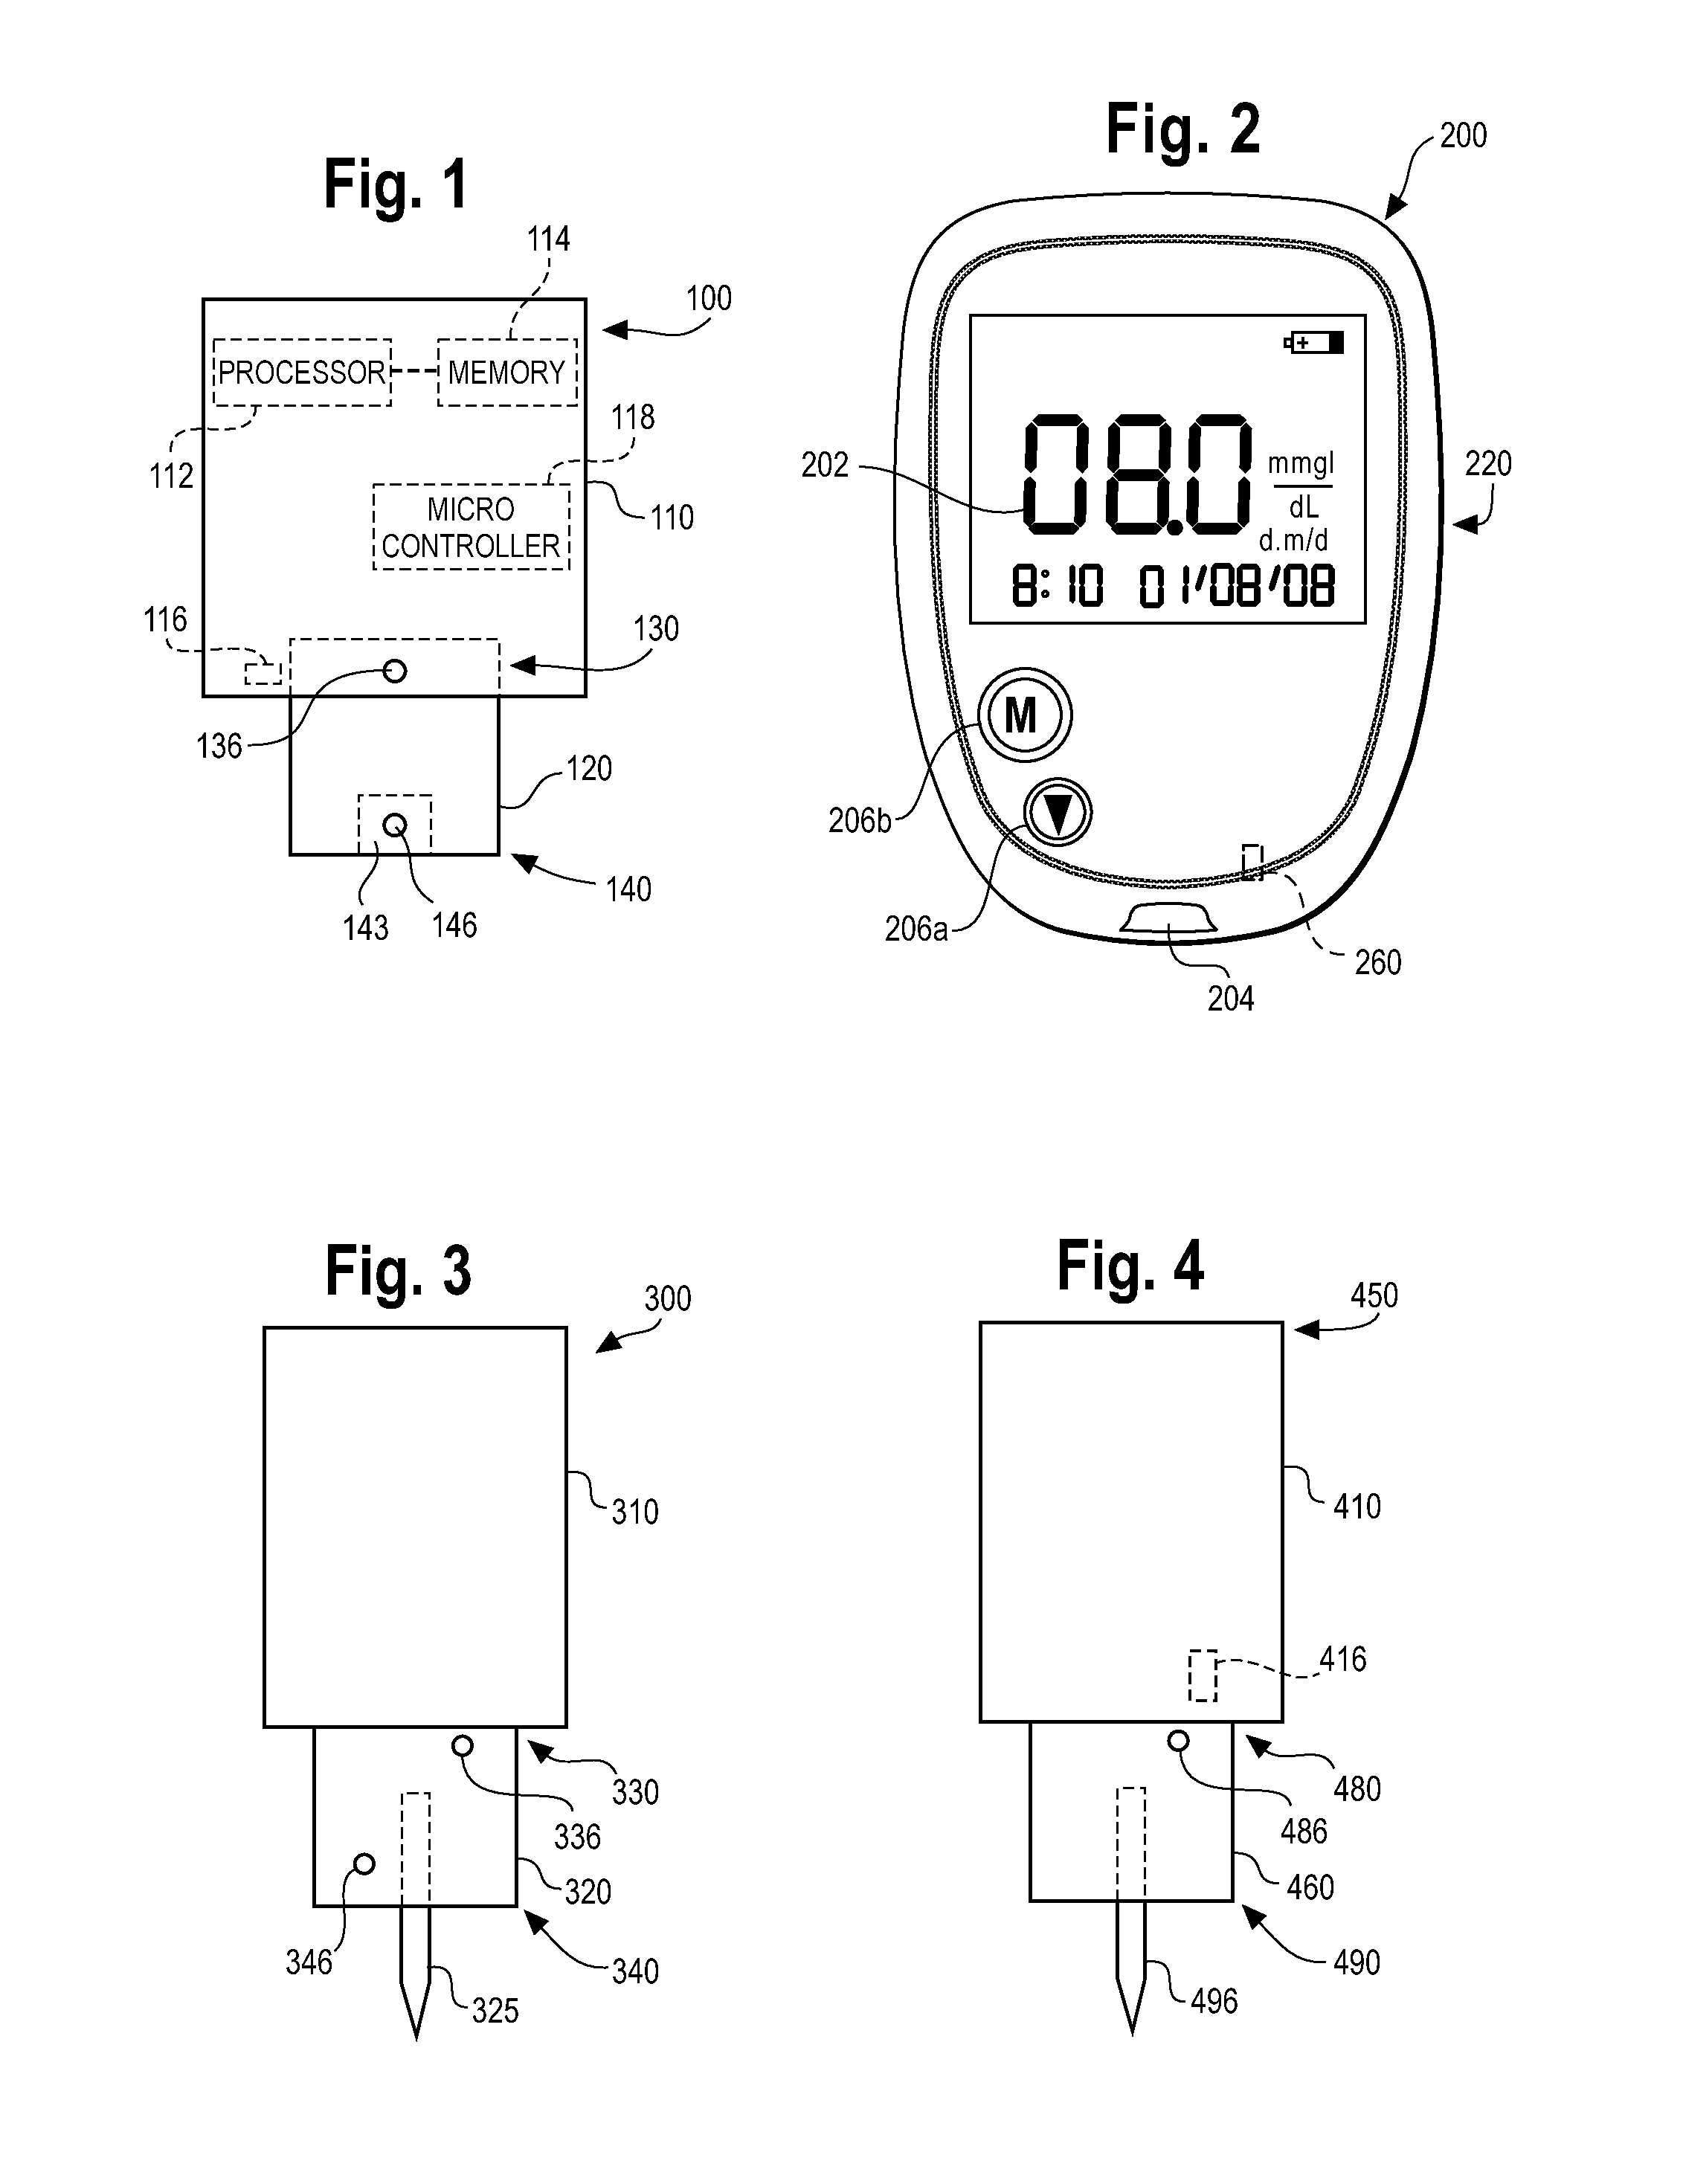 System and Apparatus for Determining Temperatures in a Fluid Analyte System